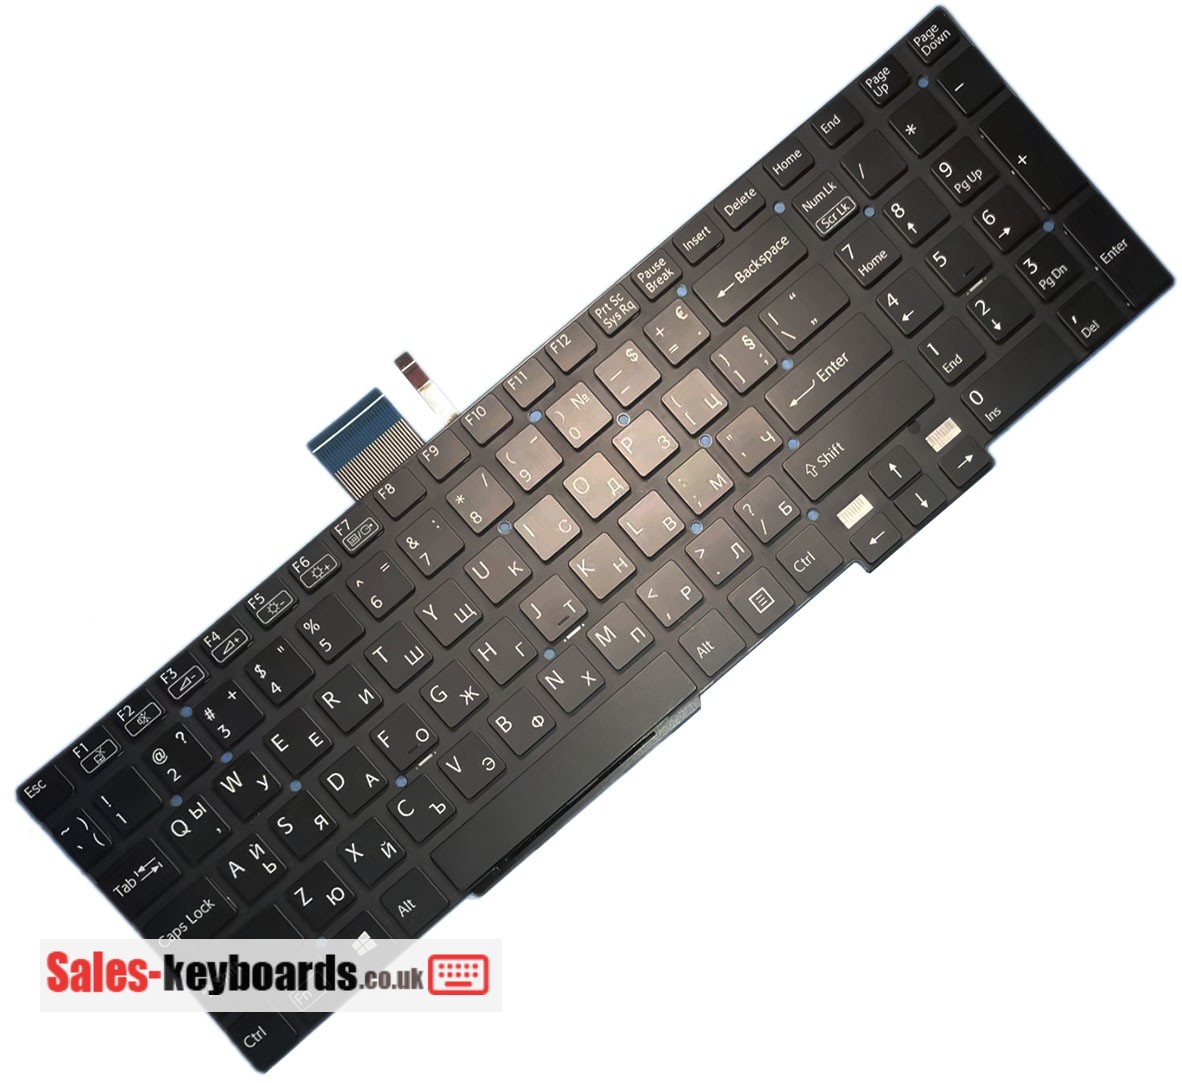 Sony VAIO SVT1511M1E/S Keyboard replacement